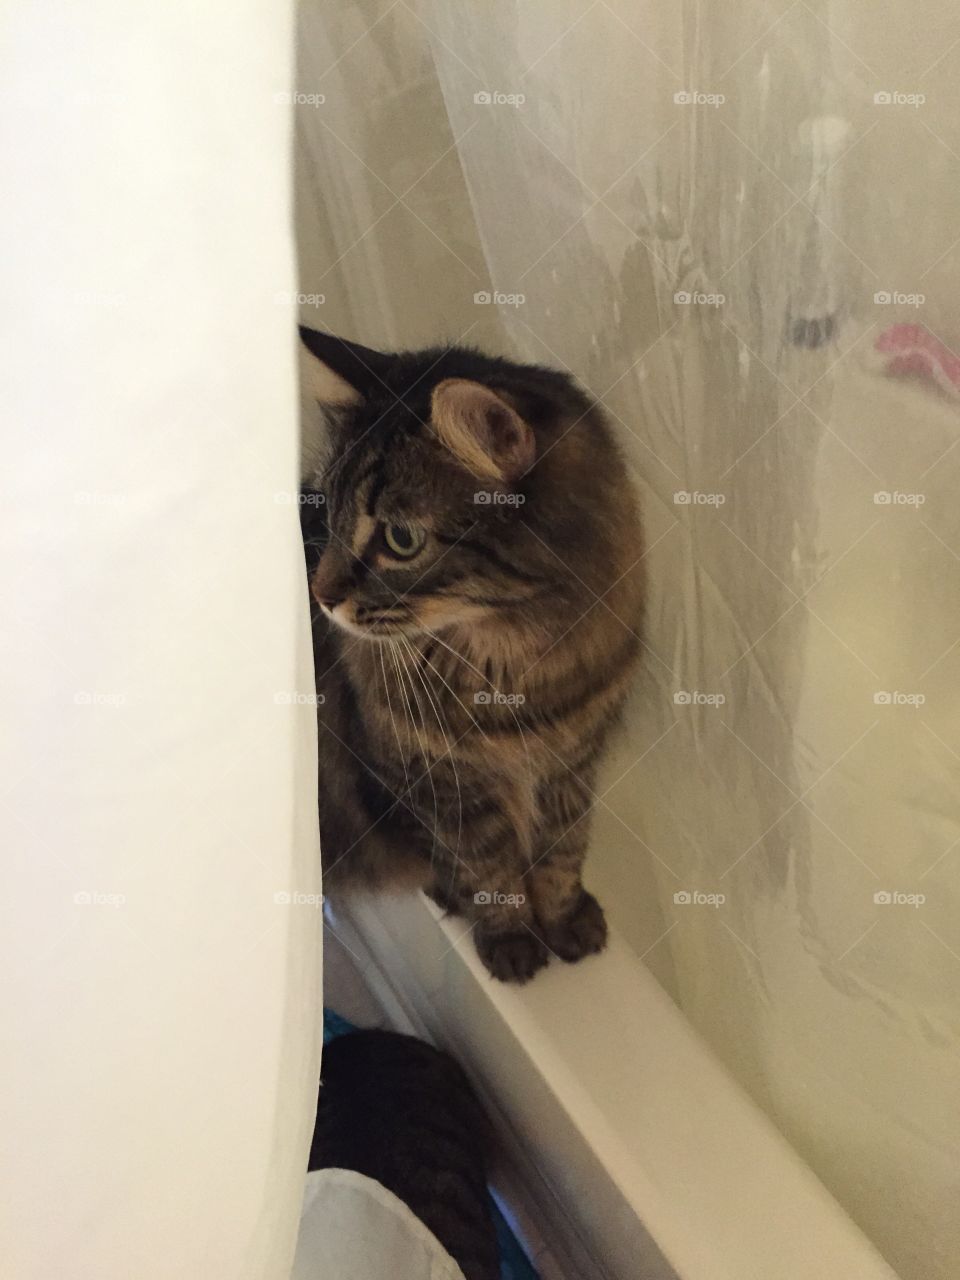 Unable to shower alone. He waits patiently. Maine Coons love the water. 